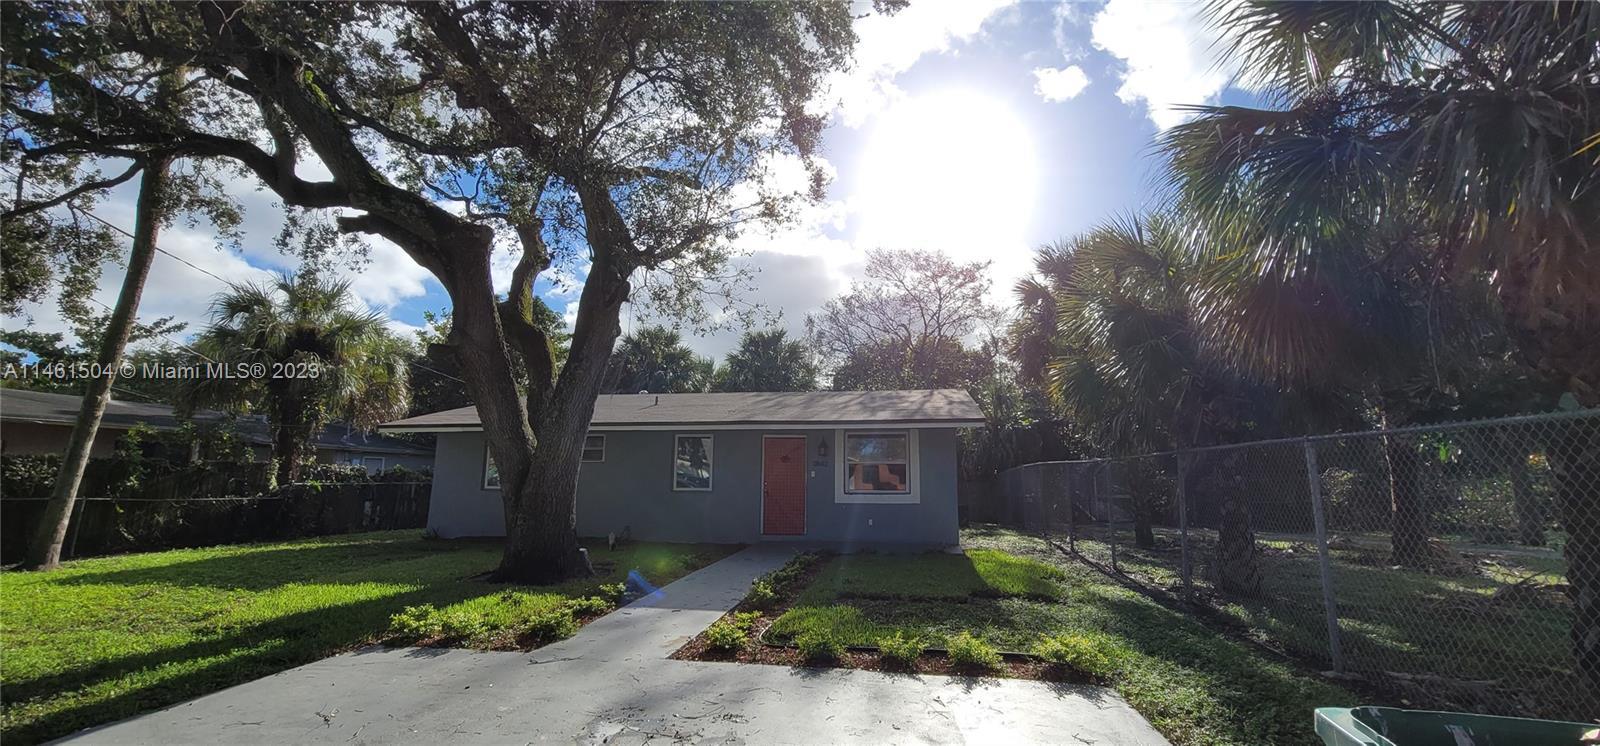 Photo of 2842 Washington Dr in Fort Lauderdale, FL